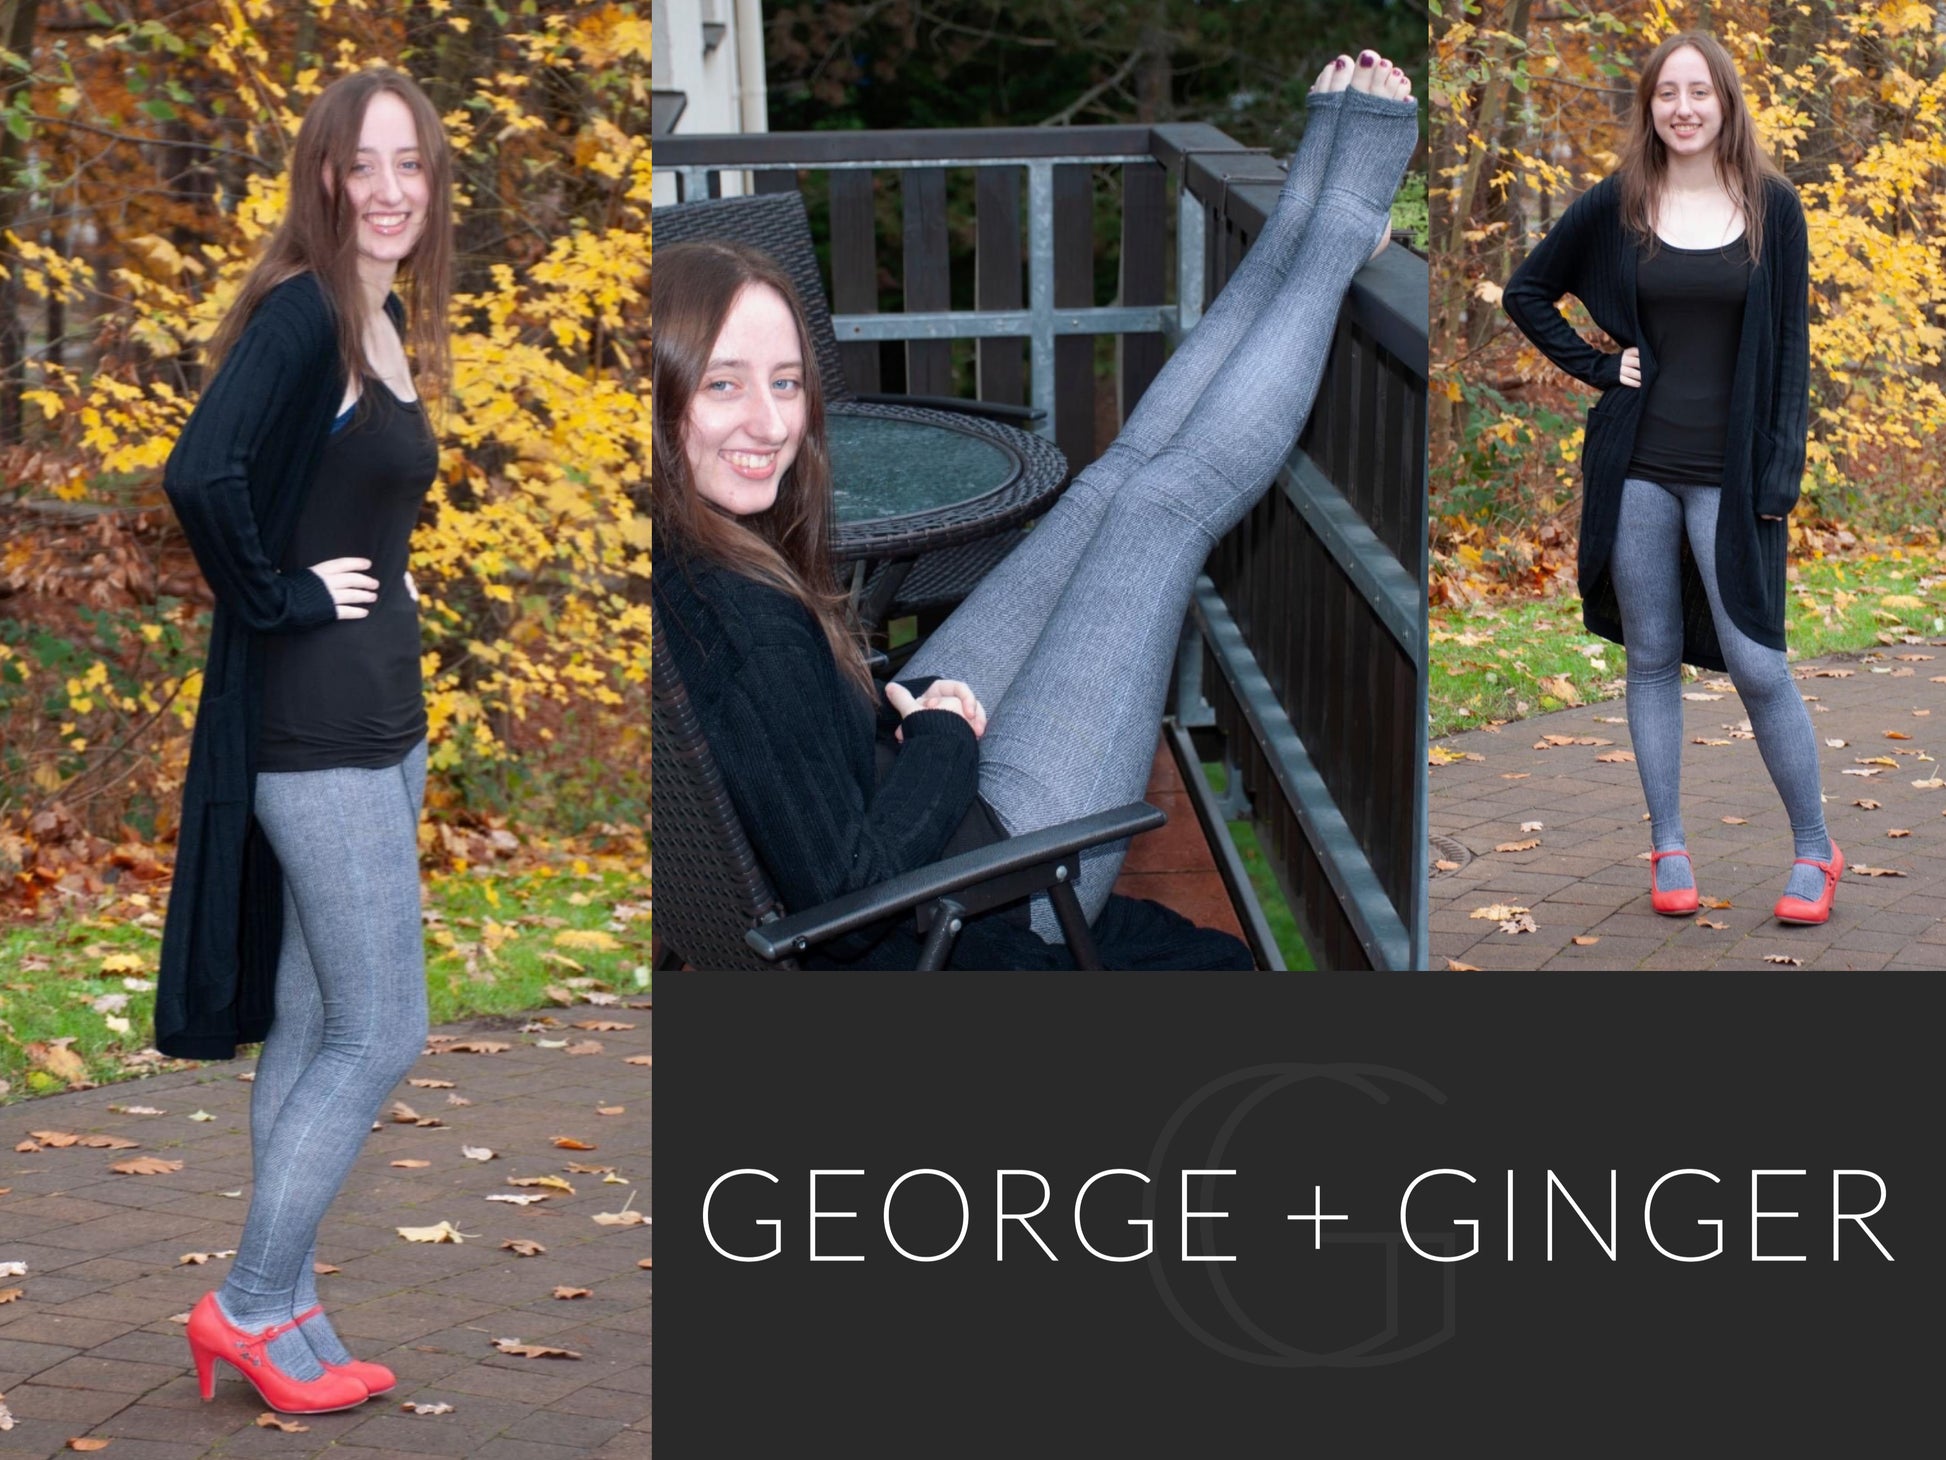 View J - The Roxie Stockings PDF Sewing Pattern – George And Ginger Patterns